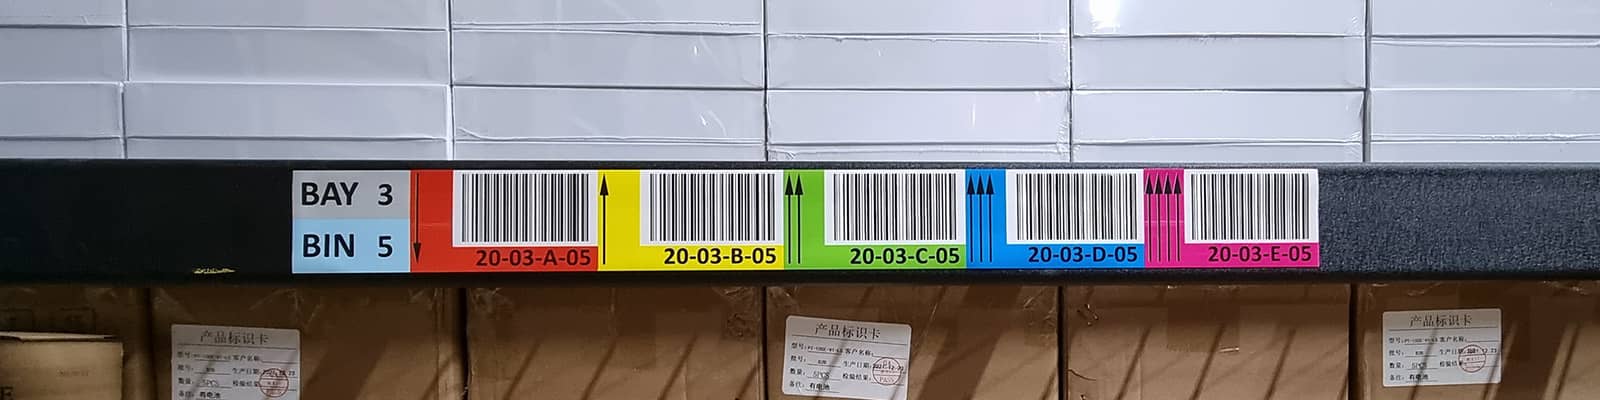 magnetic-racking-labels-with-barcode